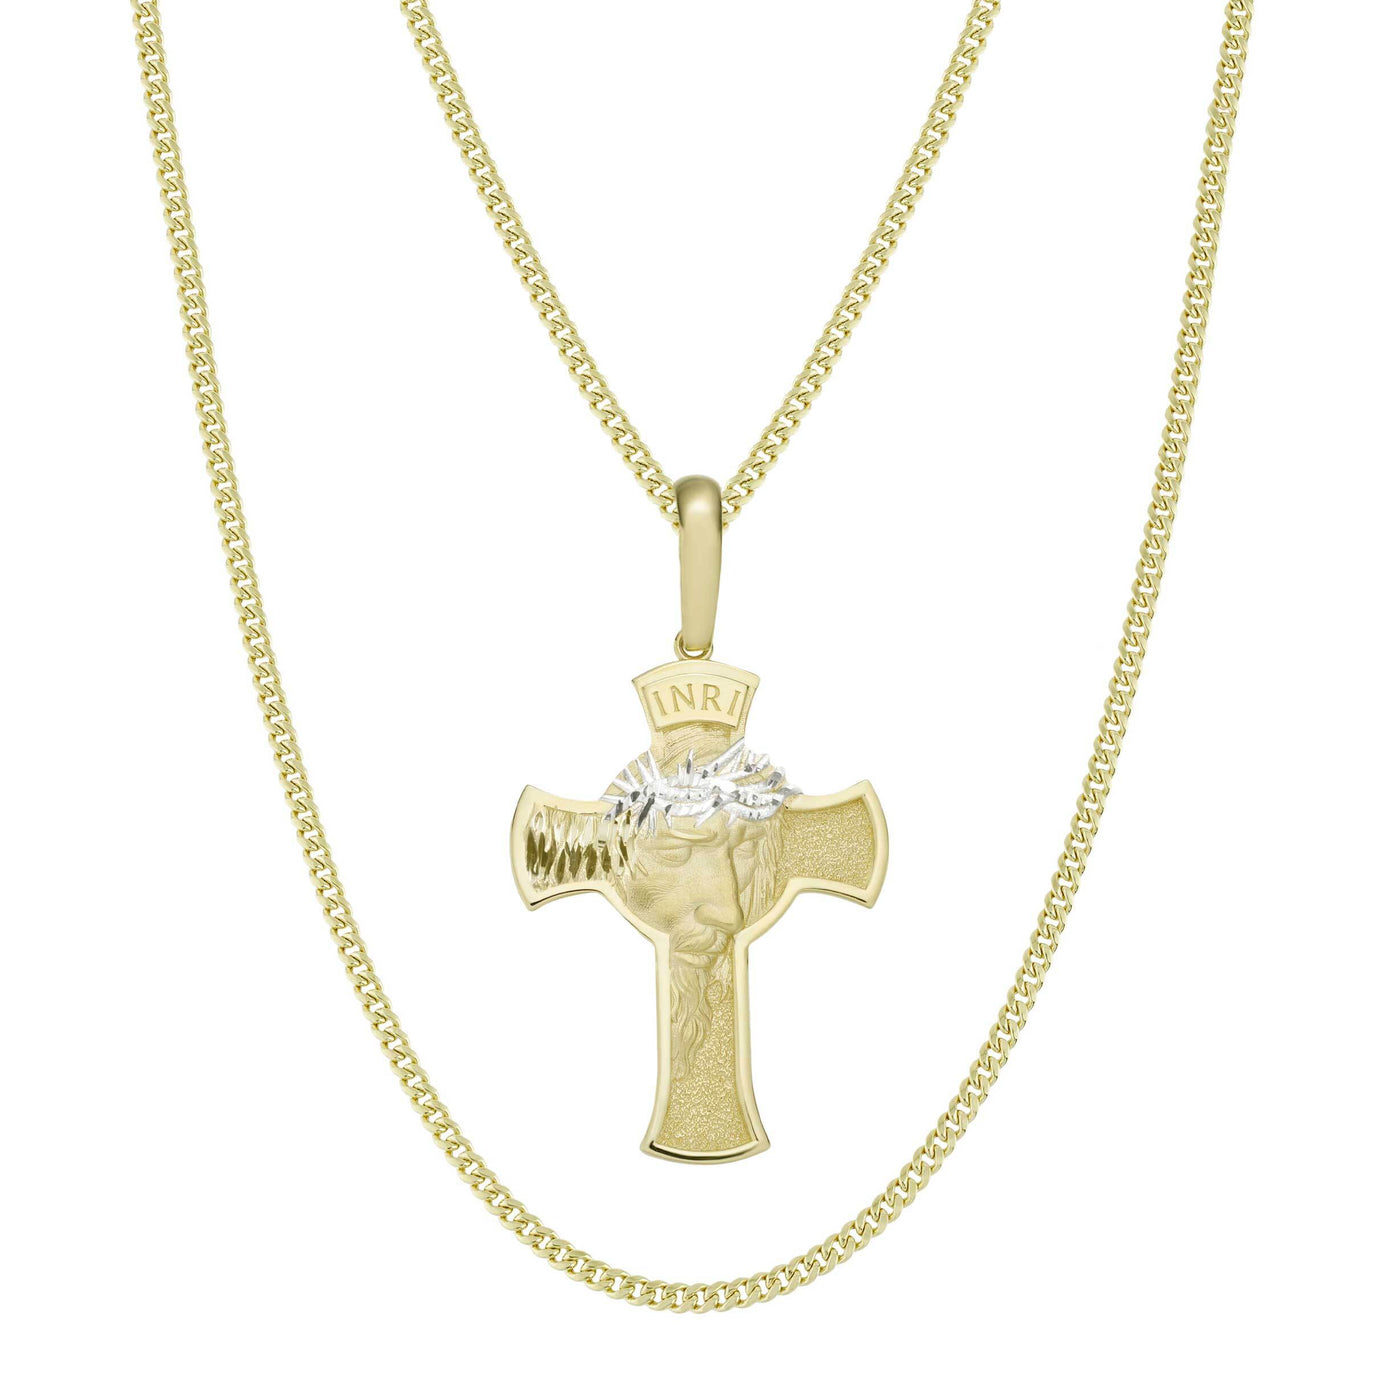 Face of Jesus Cross Two Tone Pendant & Chain Necklace Set 10K Yellow White Gold